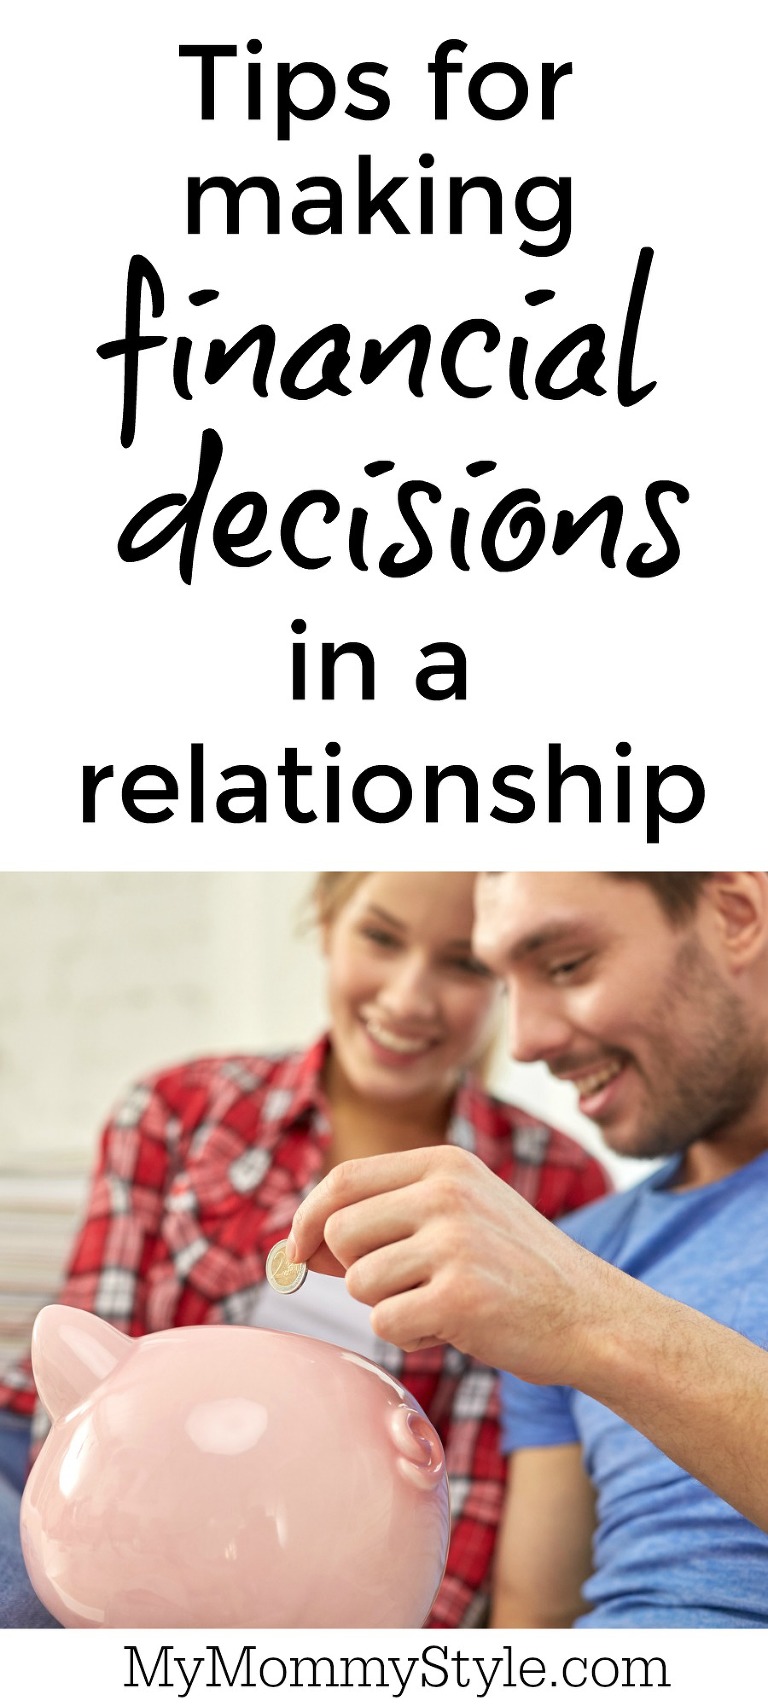 tips-for-making-financial-decisions-in-a-relationship